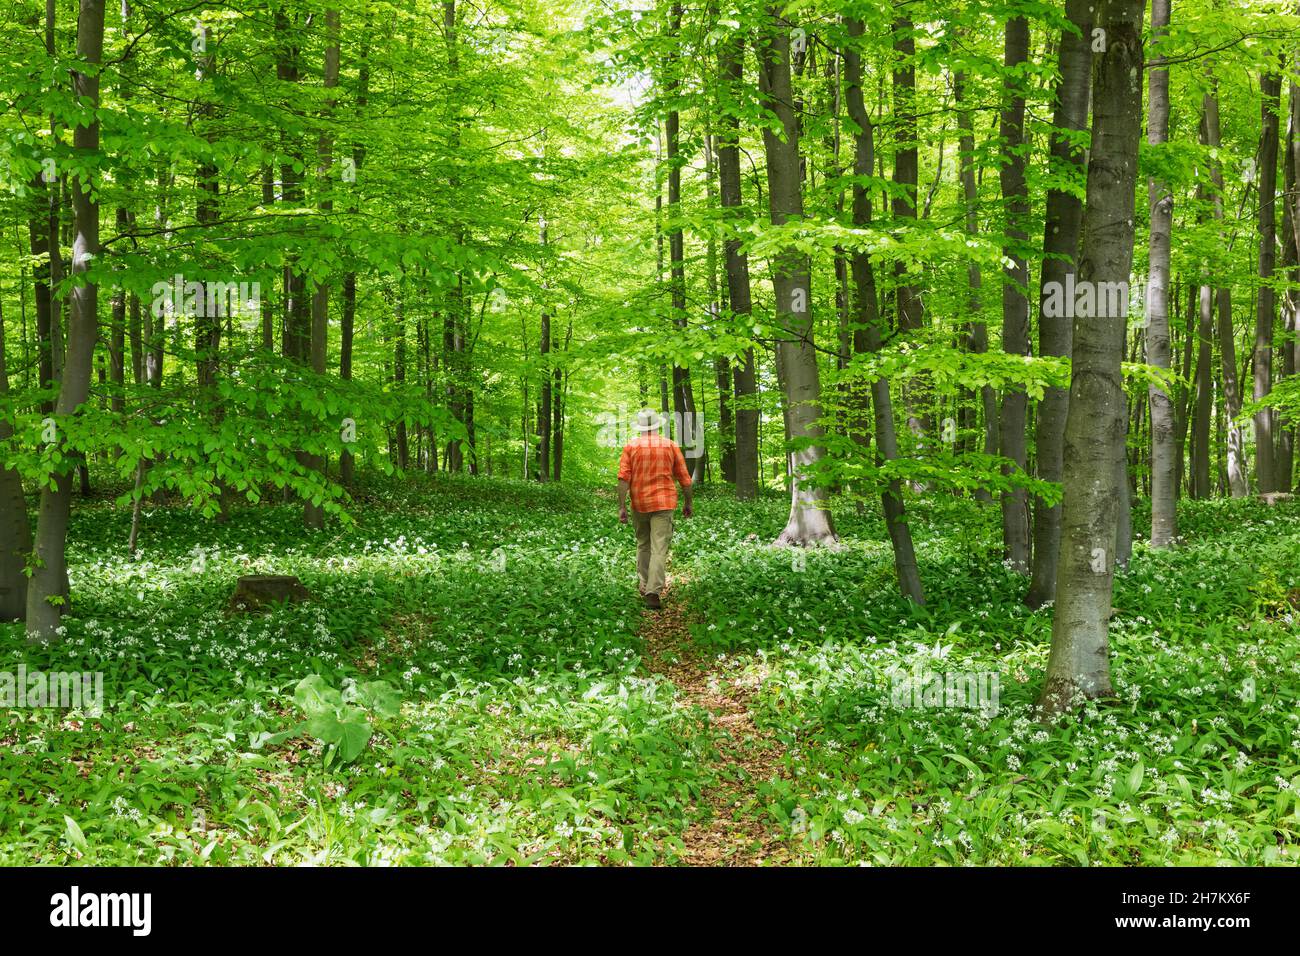 Ramson flowers with senior man in green forest Stock Photo